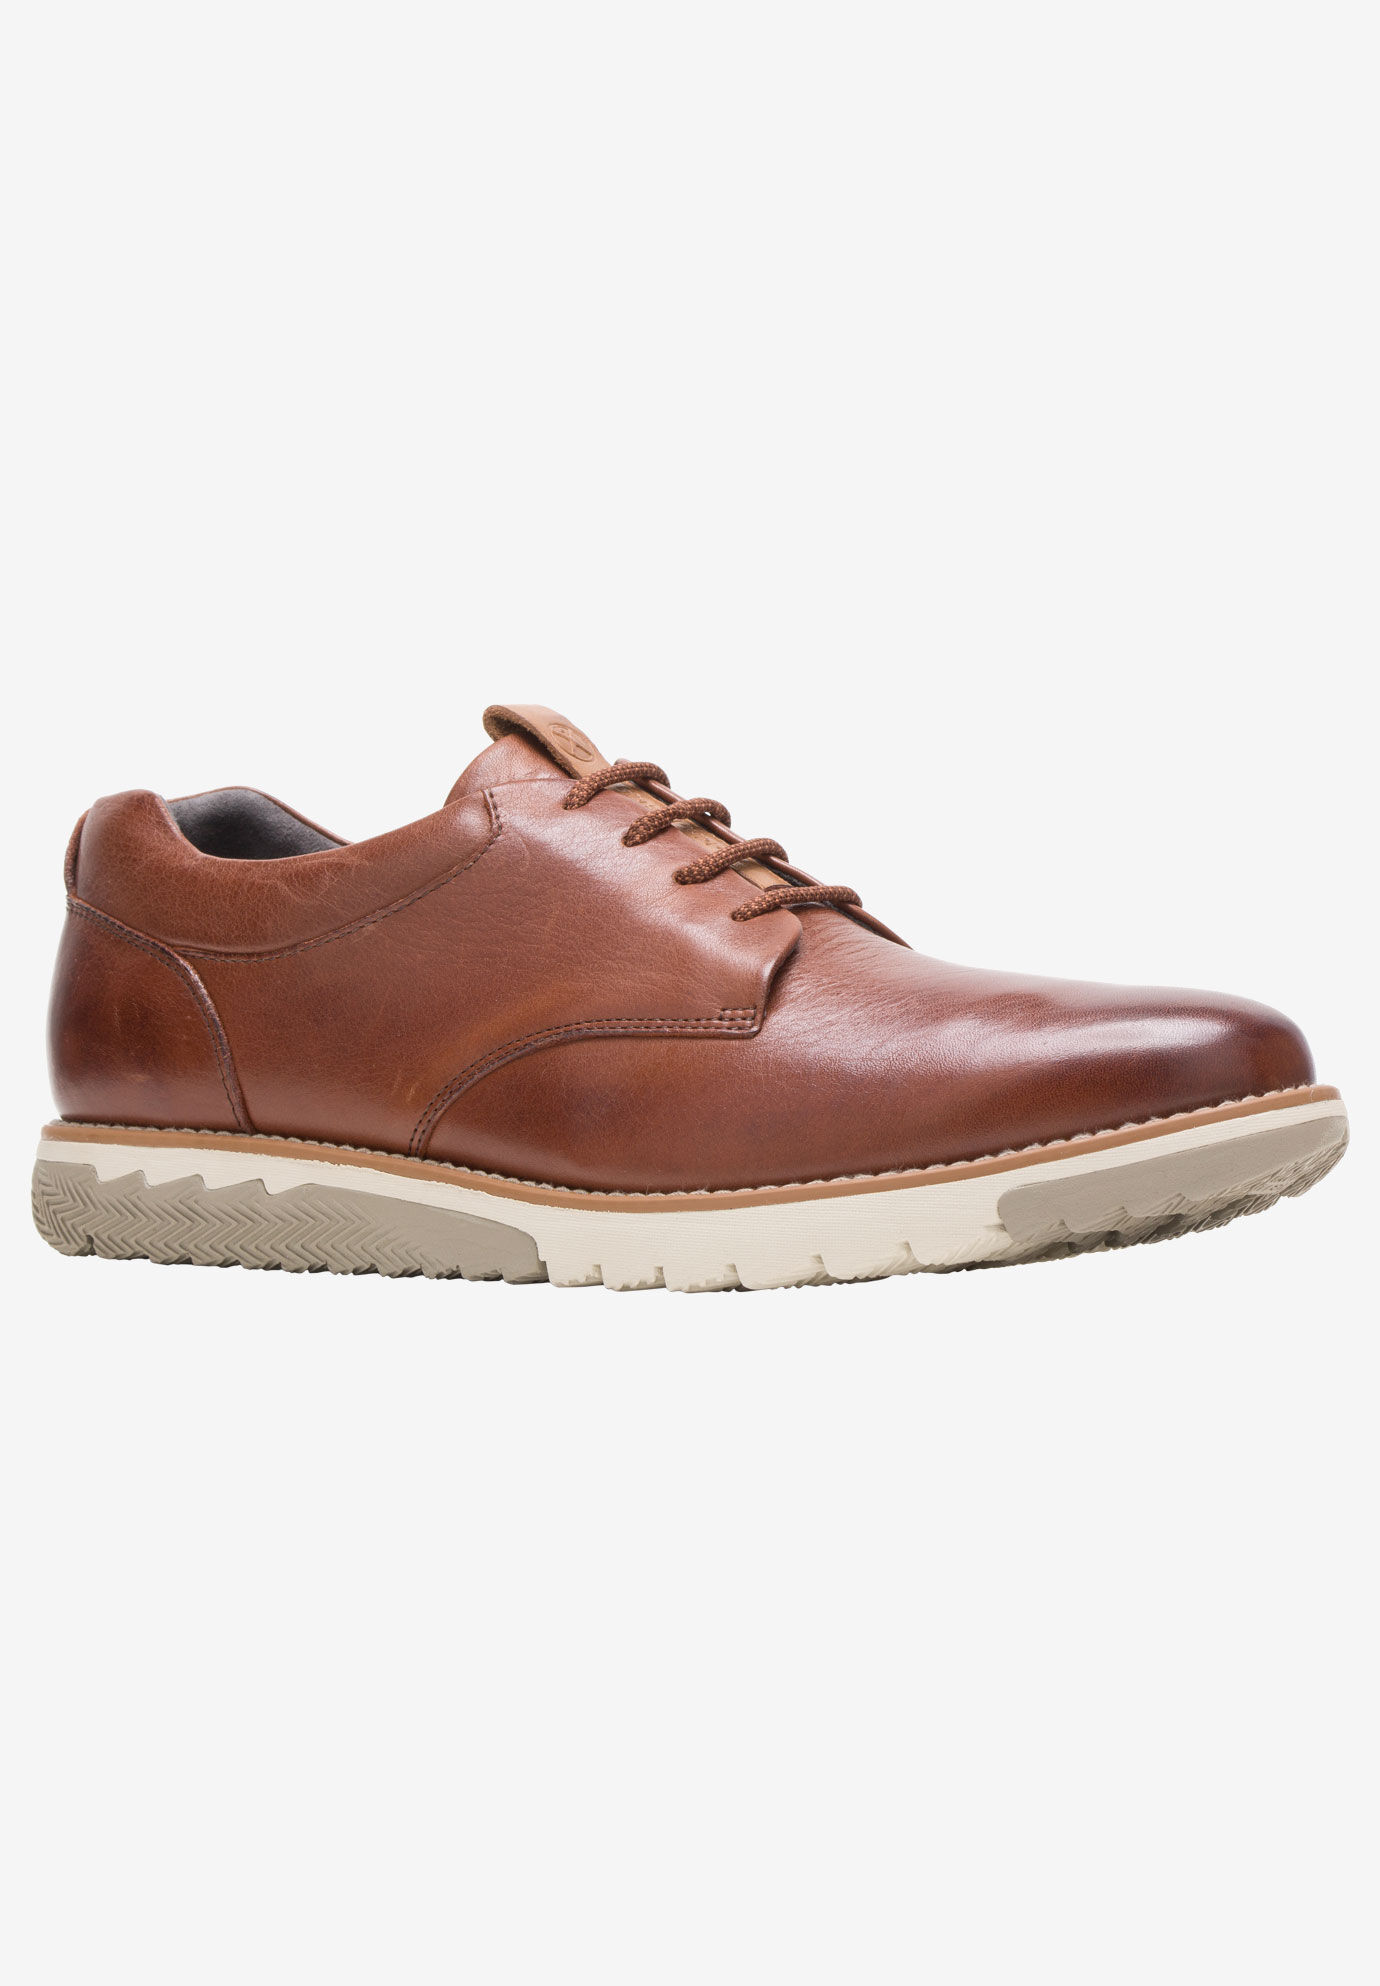 hush puppies wide width shoes